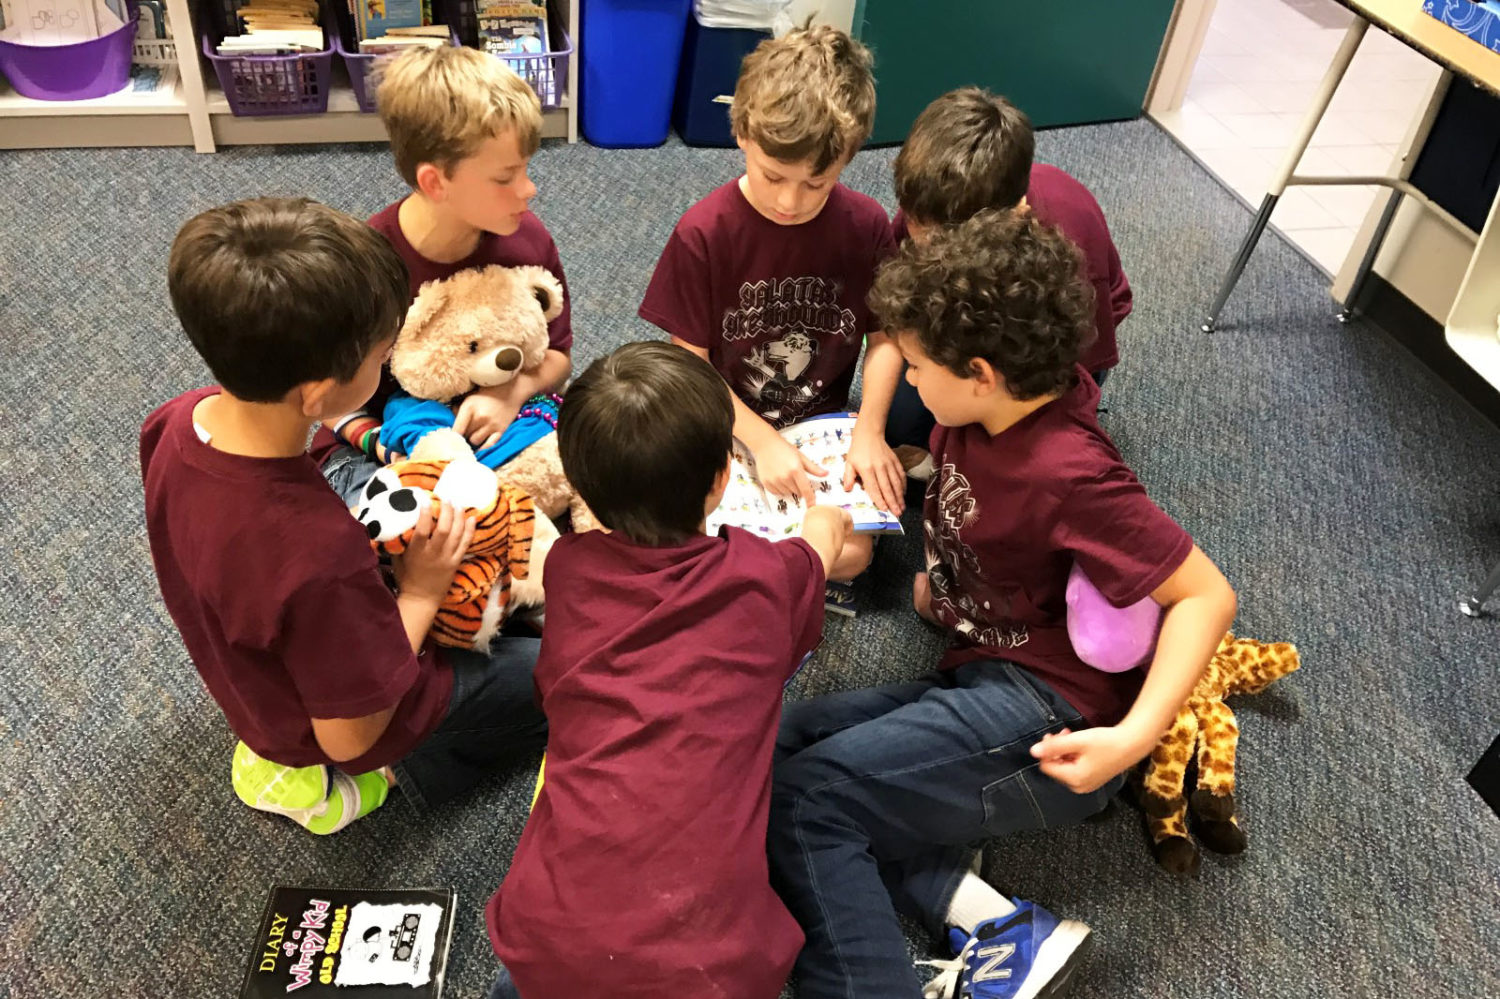 Galatas second graders spend time reading with friends.